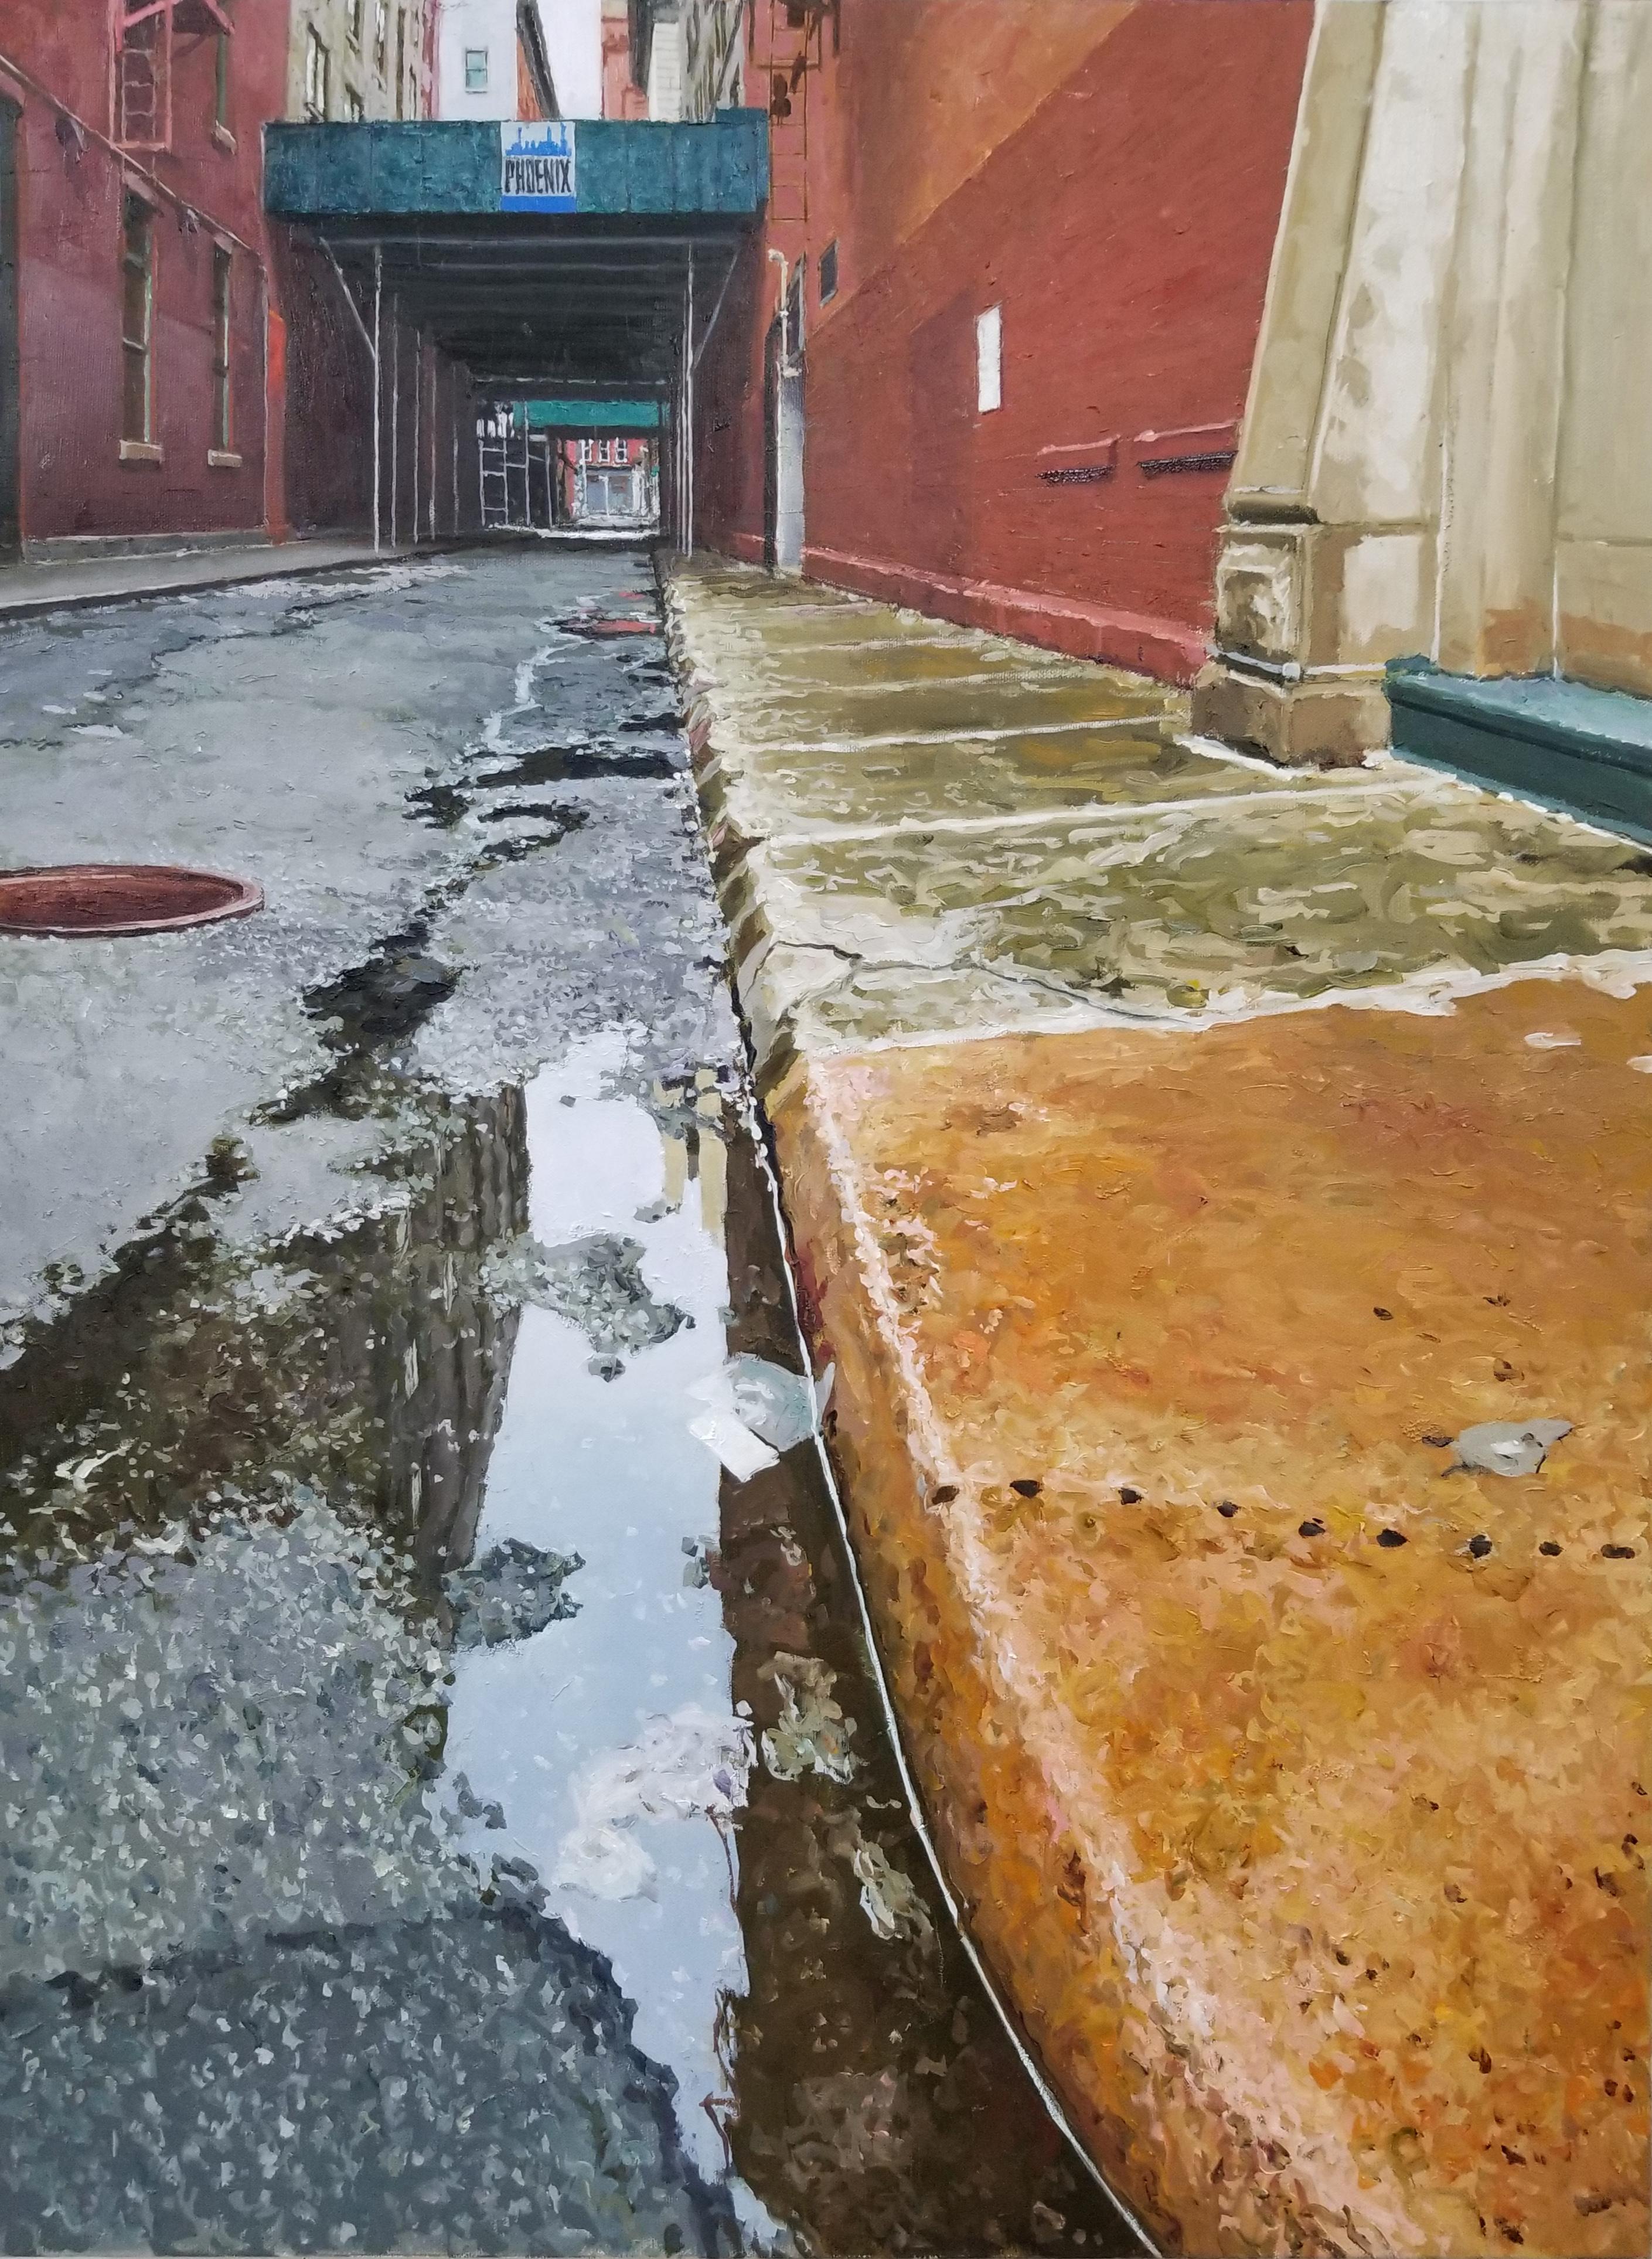 Richard Combes Landscape Painting - THE MORNING AFTER, street corner, new york city, puddle, cityscape, realism